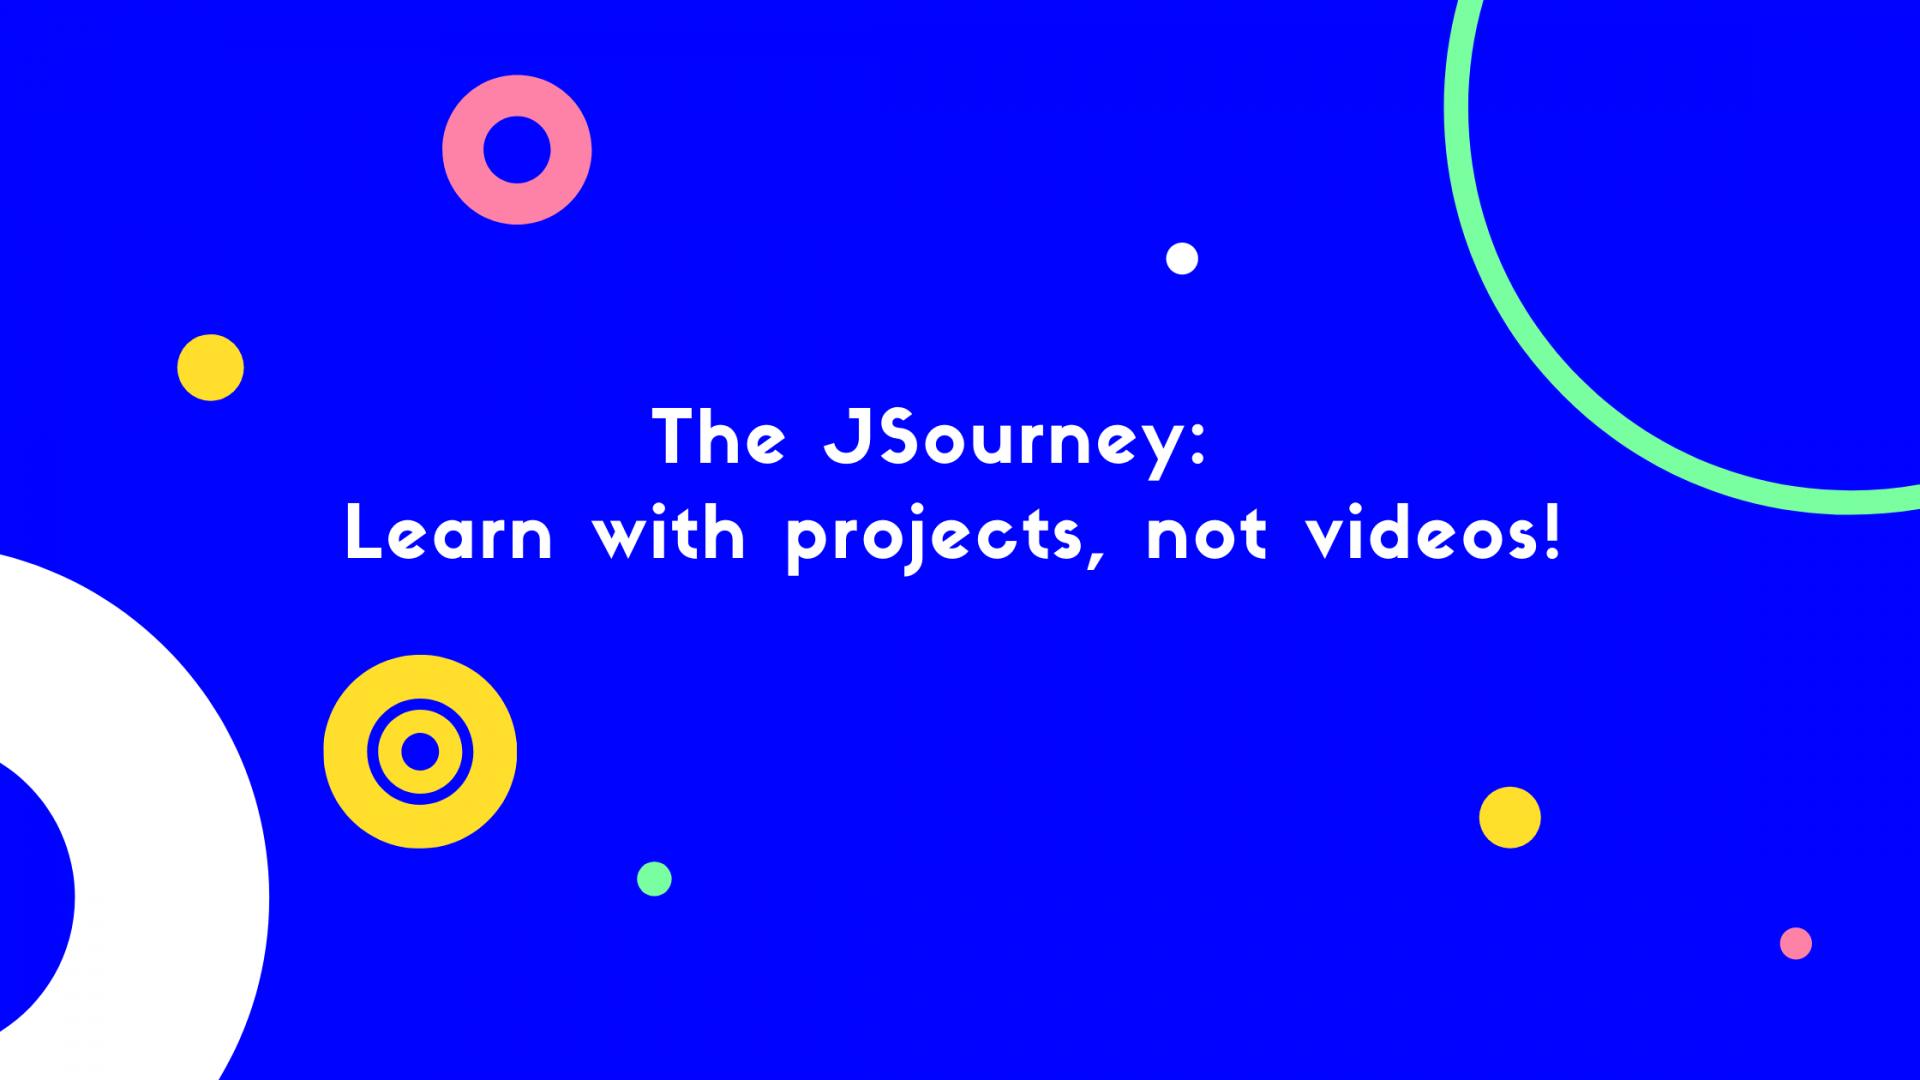 The JSourney: Learn with projects, not videos!